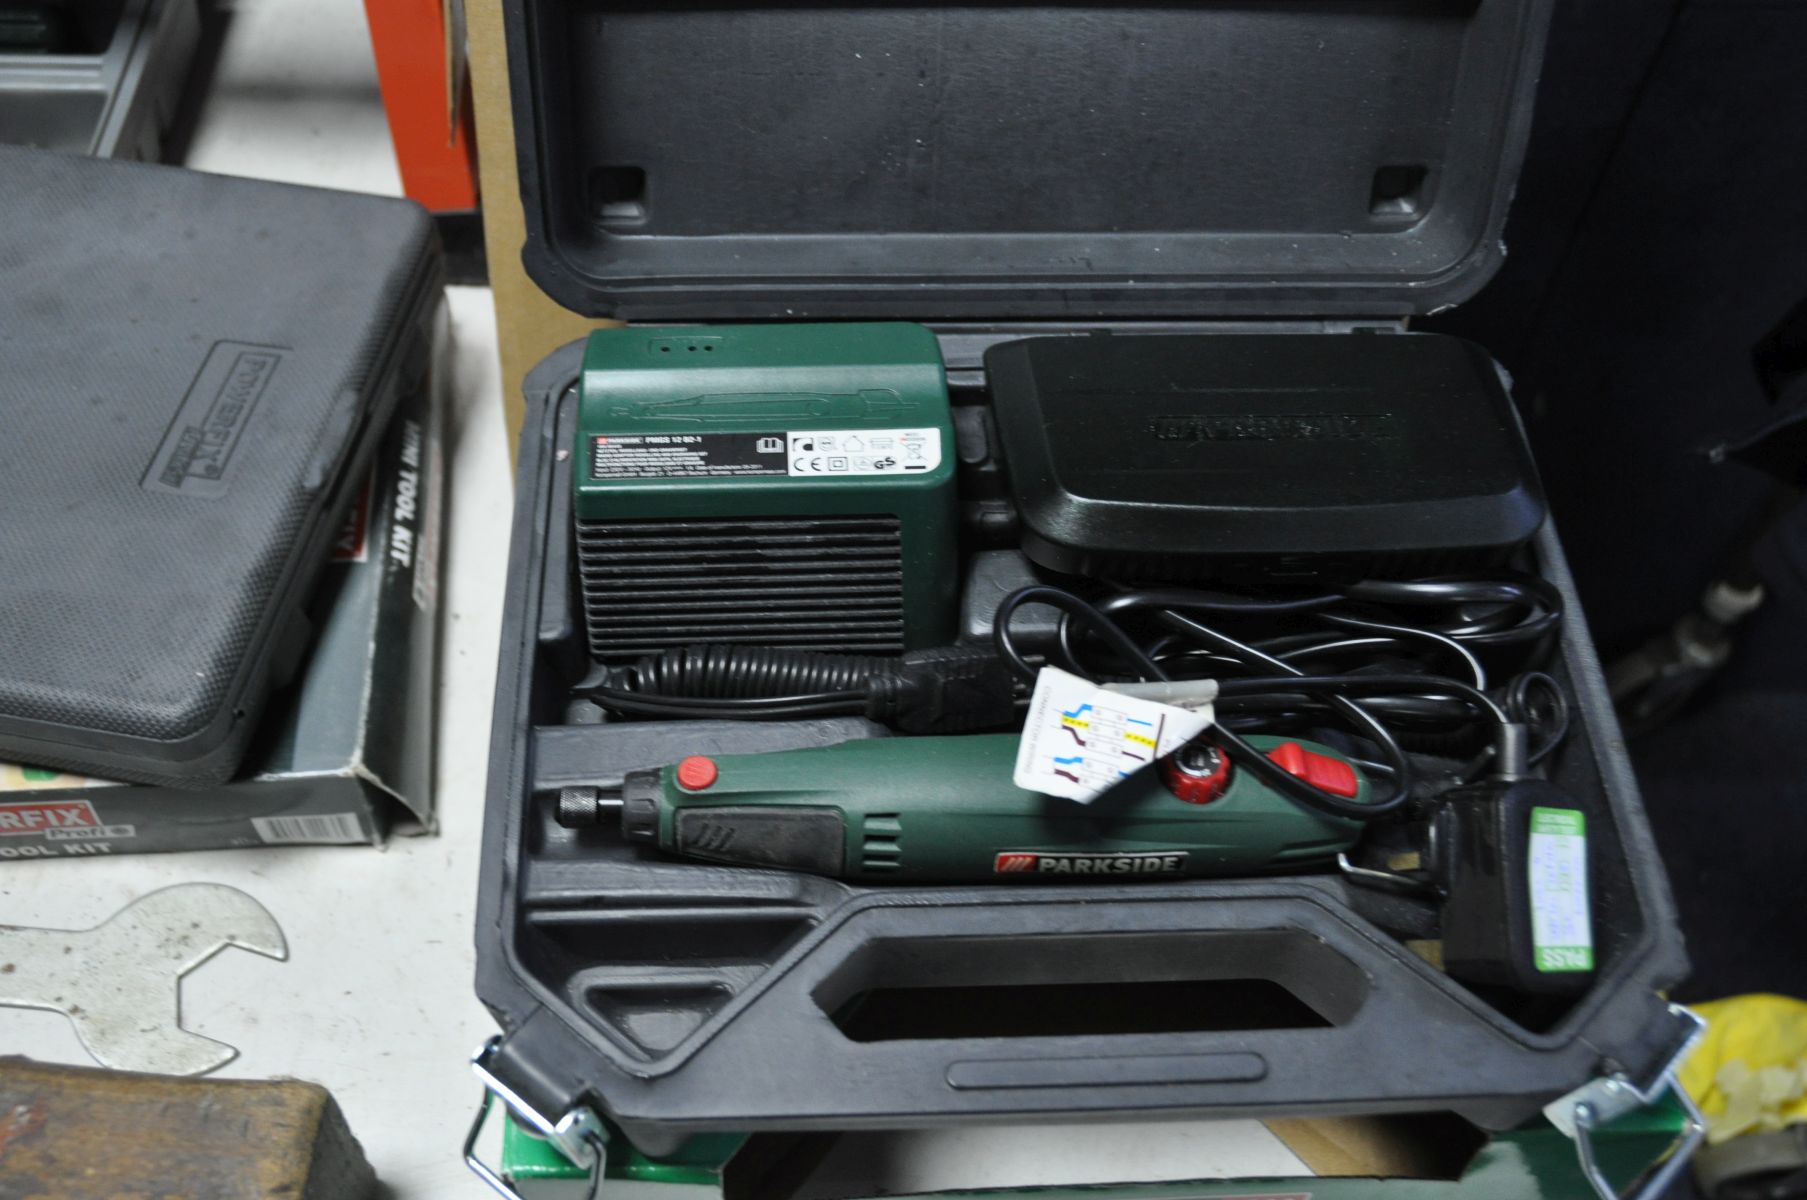 A COLLECTION OF POWER TOOLS including a B&Q circular Saw, a Challenge Xtreme 18V drill set, a - Image 5 of 5